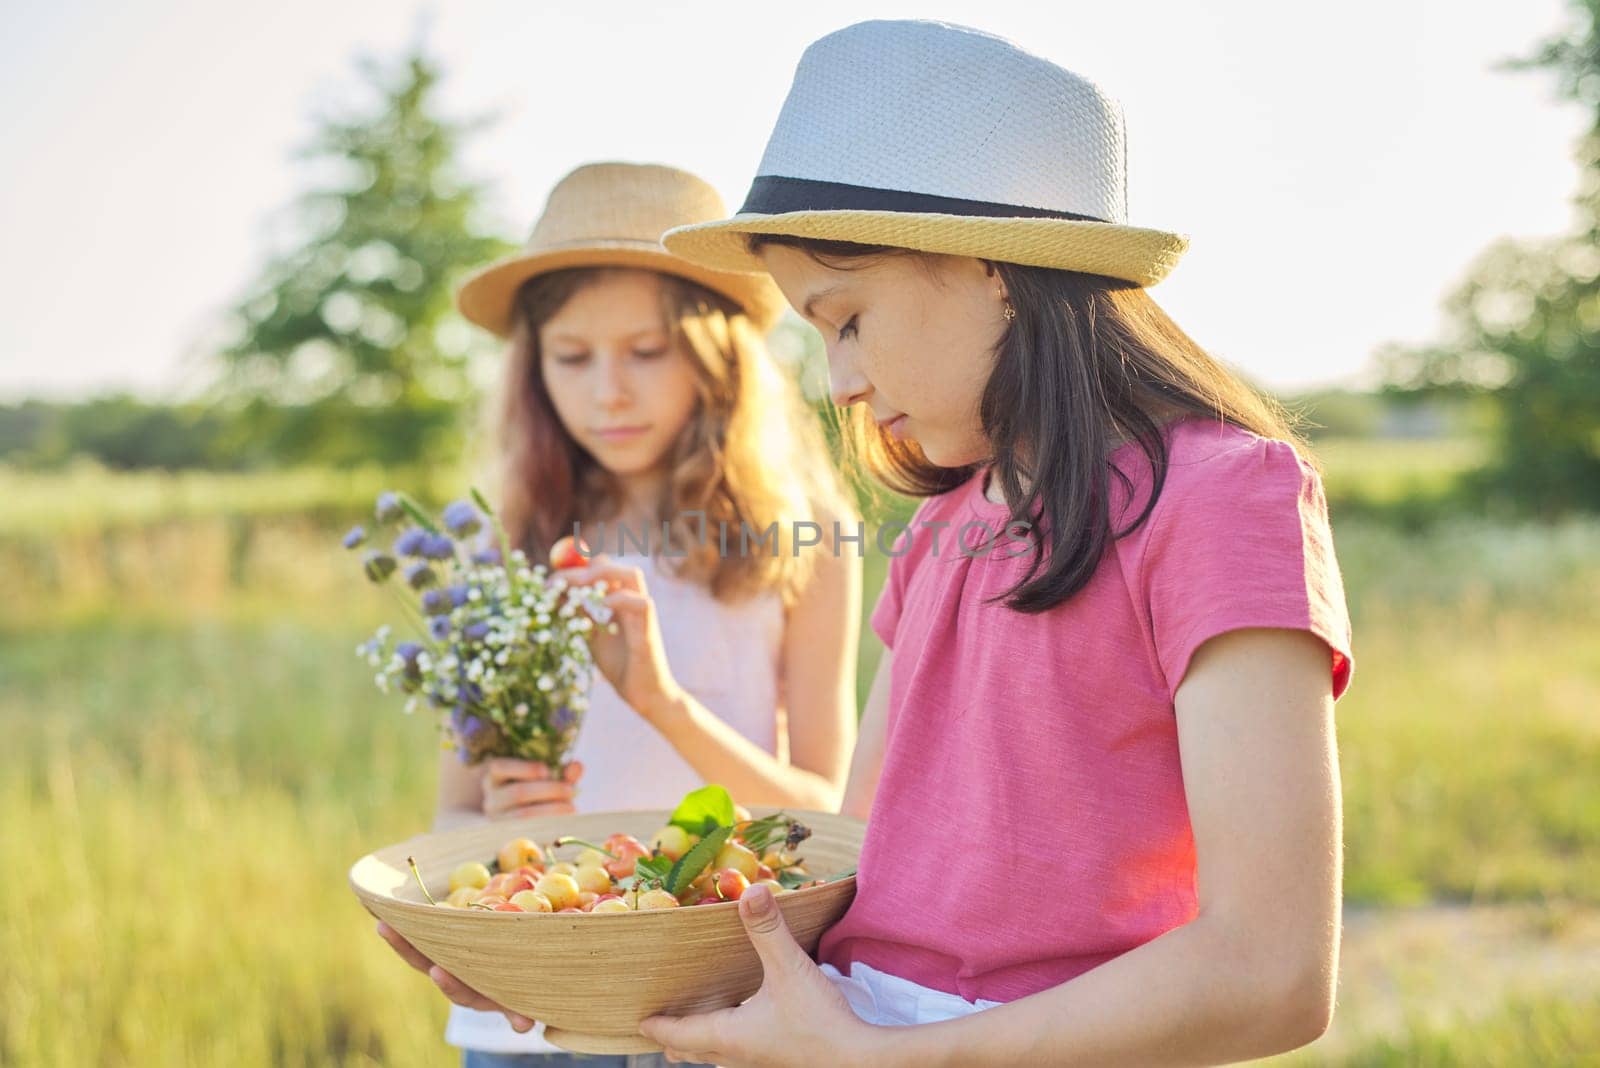 Two girls in meadow on sunny summer day, children walking, with bouquet of wildflowers basket of yellow cherries. Healthy lifestyle and food, sunset landscape background